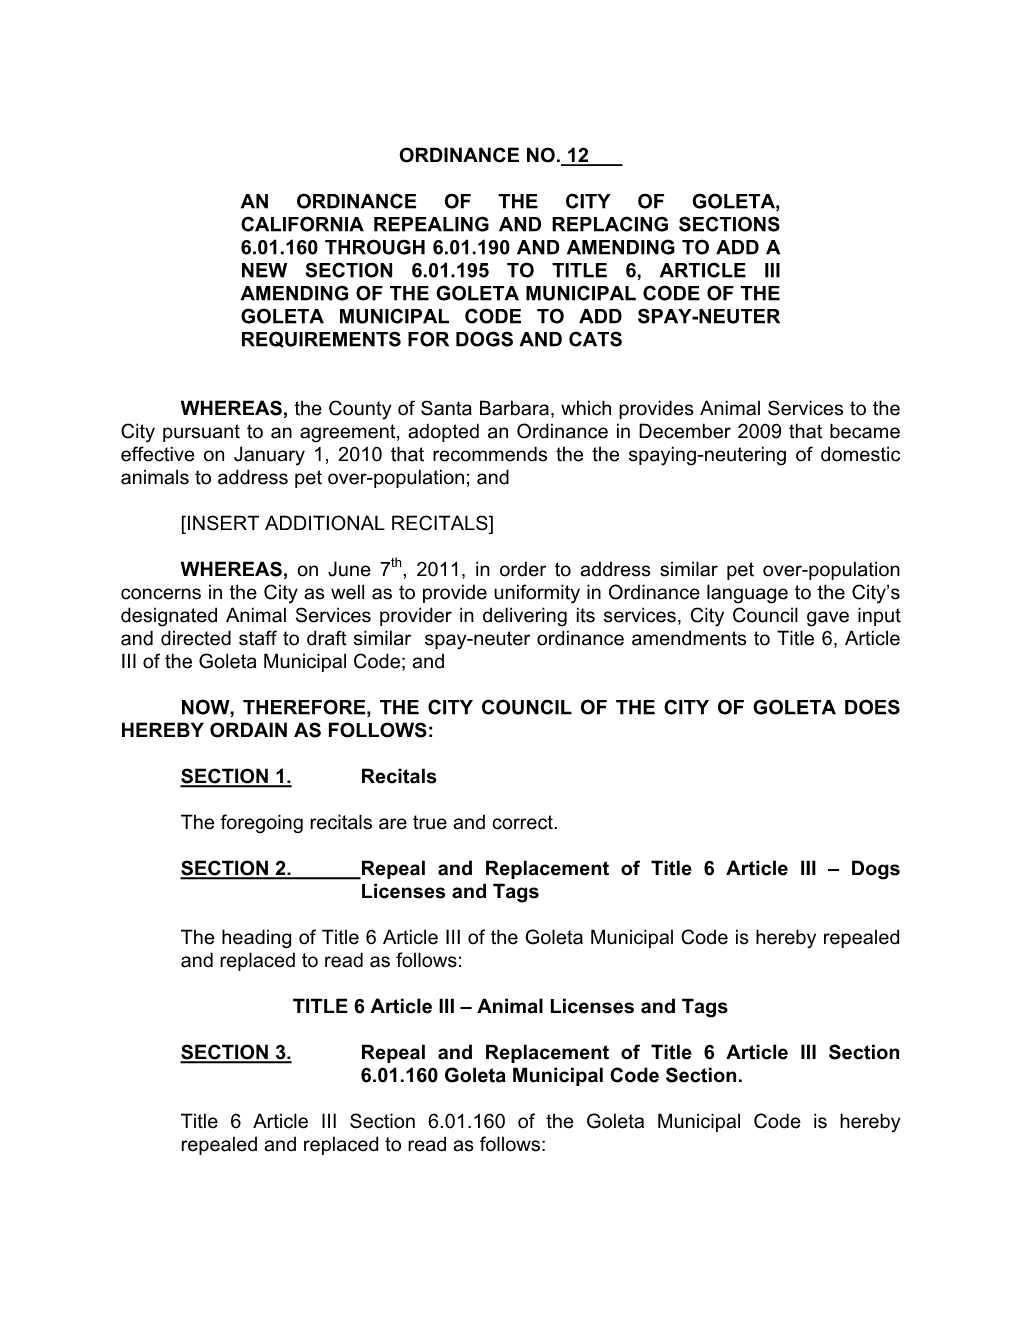 Ordinance No. 12___ an Ordinance of the City of Goleta, California Repealing and Replacing Sections 6.01.160 Through 6.01.190 An